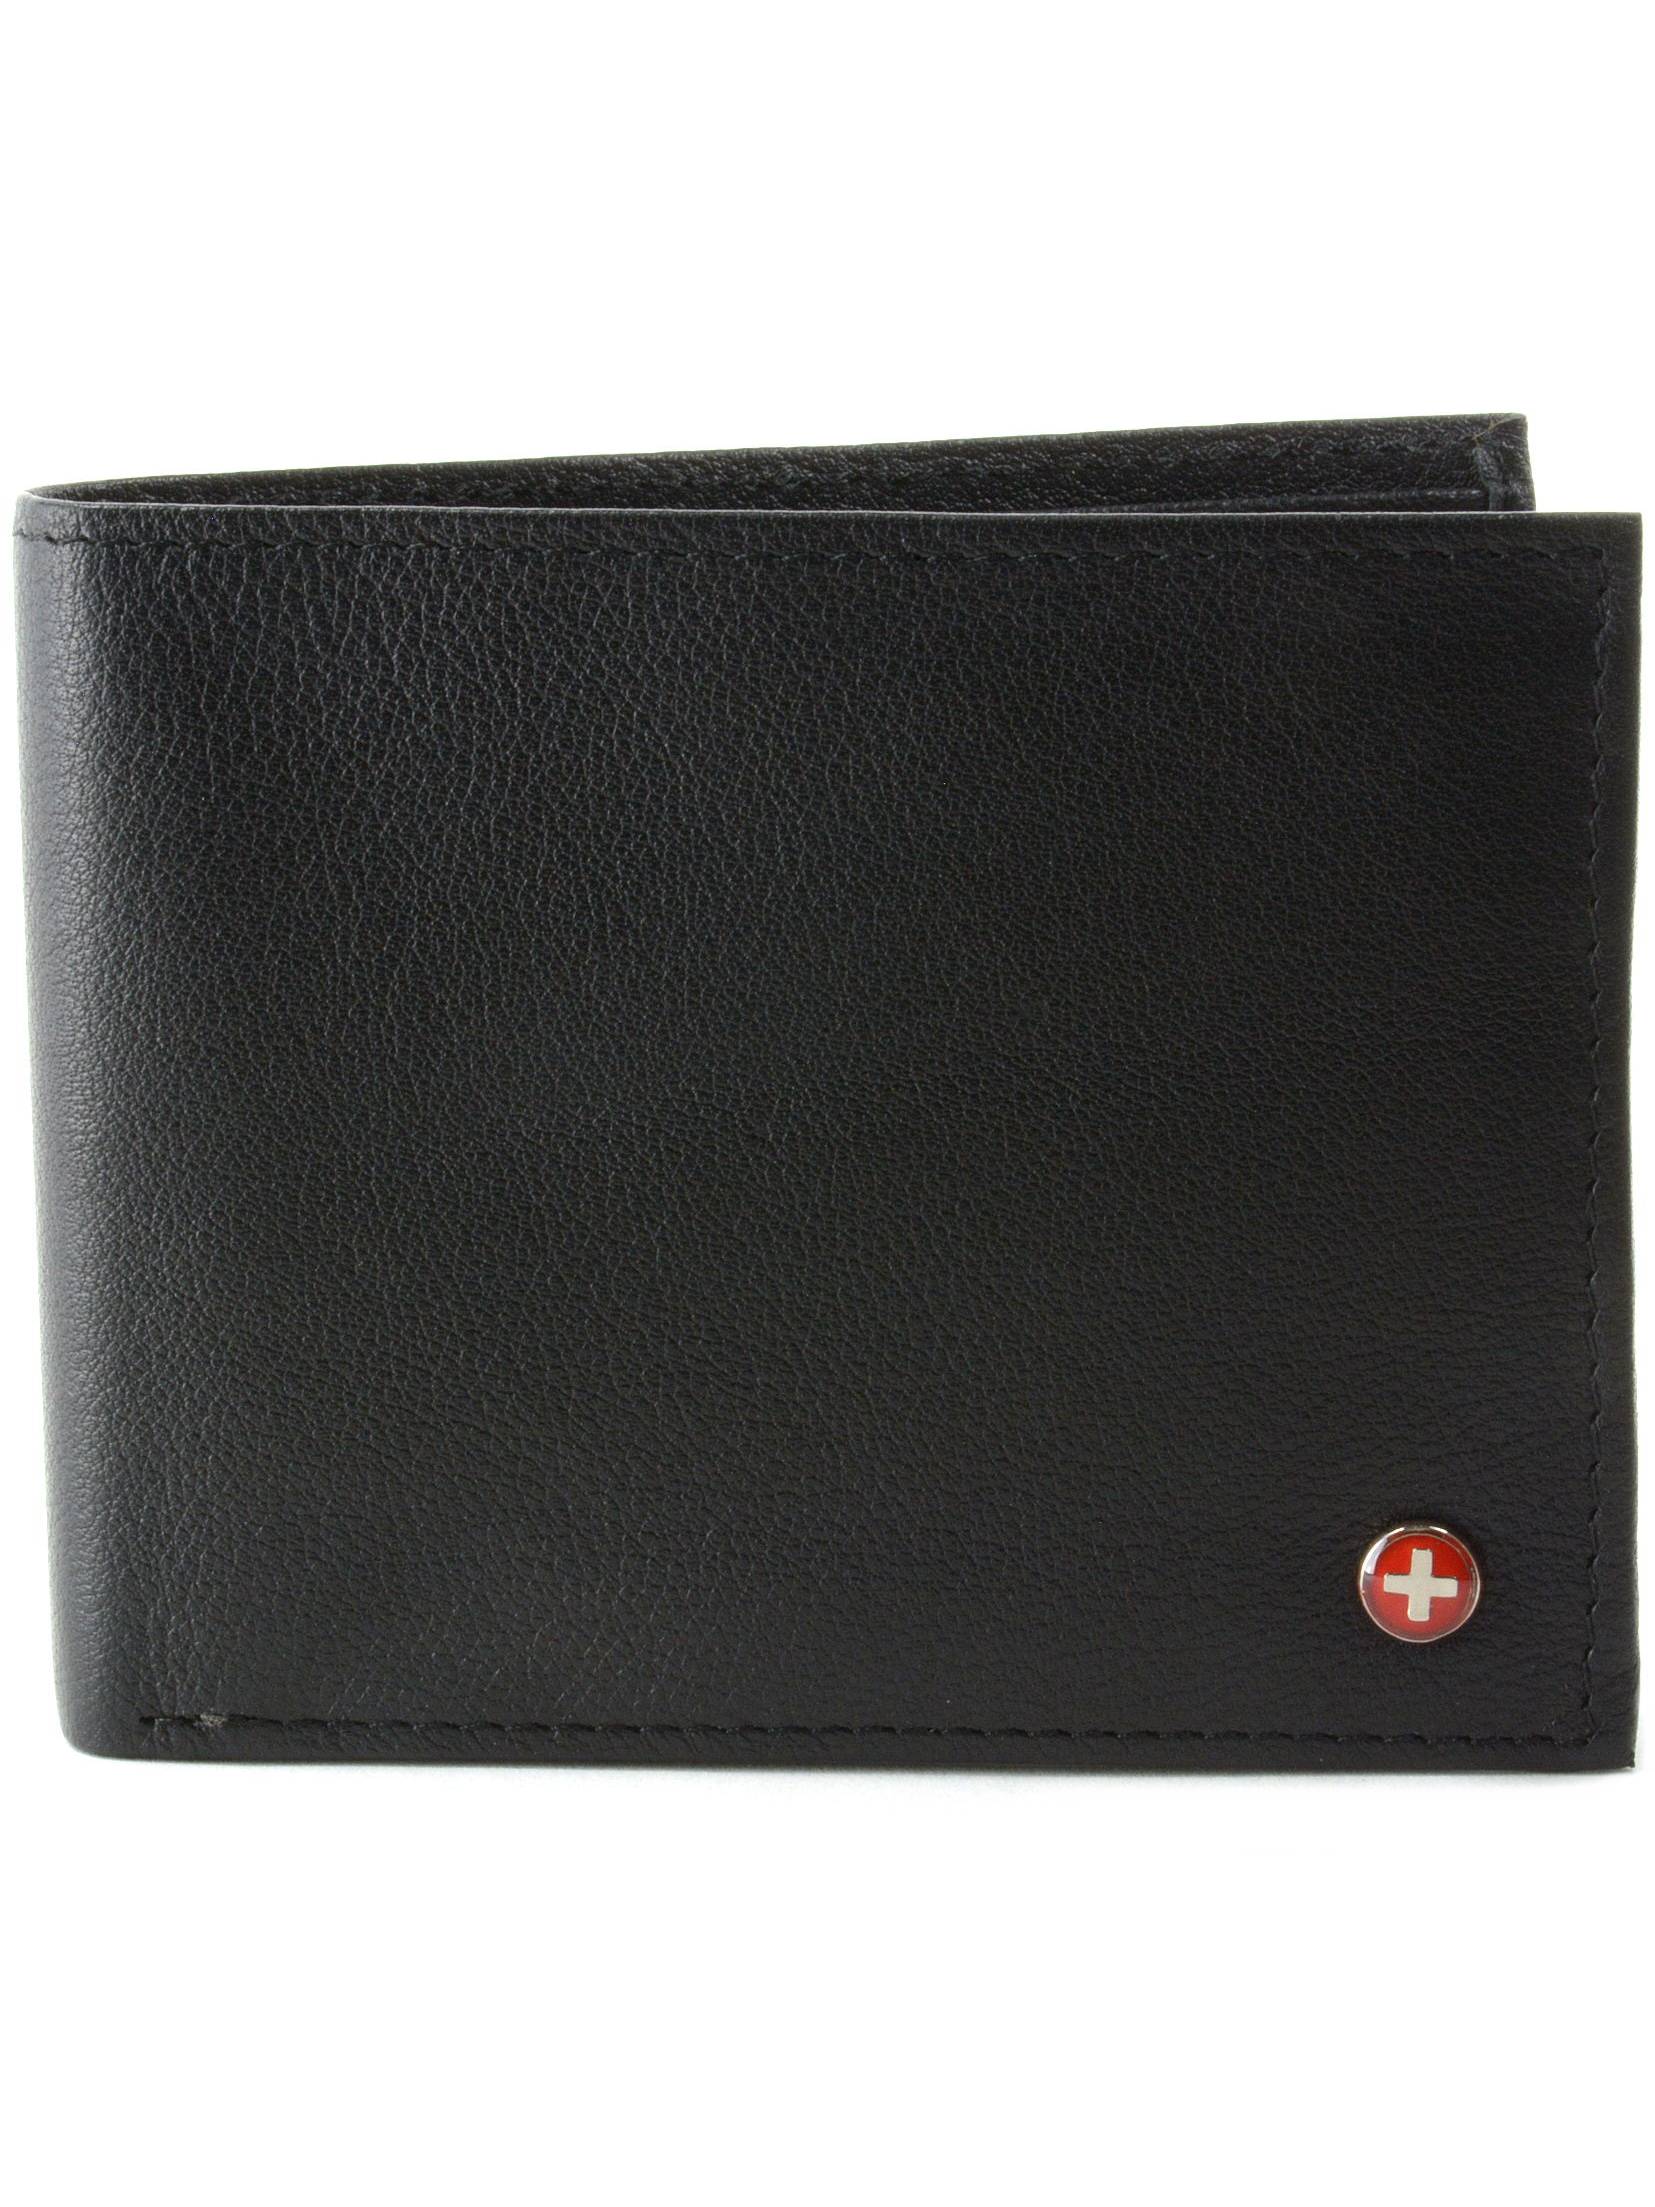 Alpine Swiss Mens Wallet Real Leather Flipout Hybrid Bifold Trifold ID Card Case - image 2 of 7